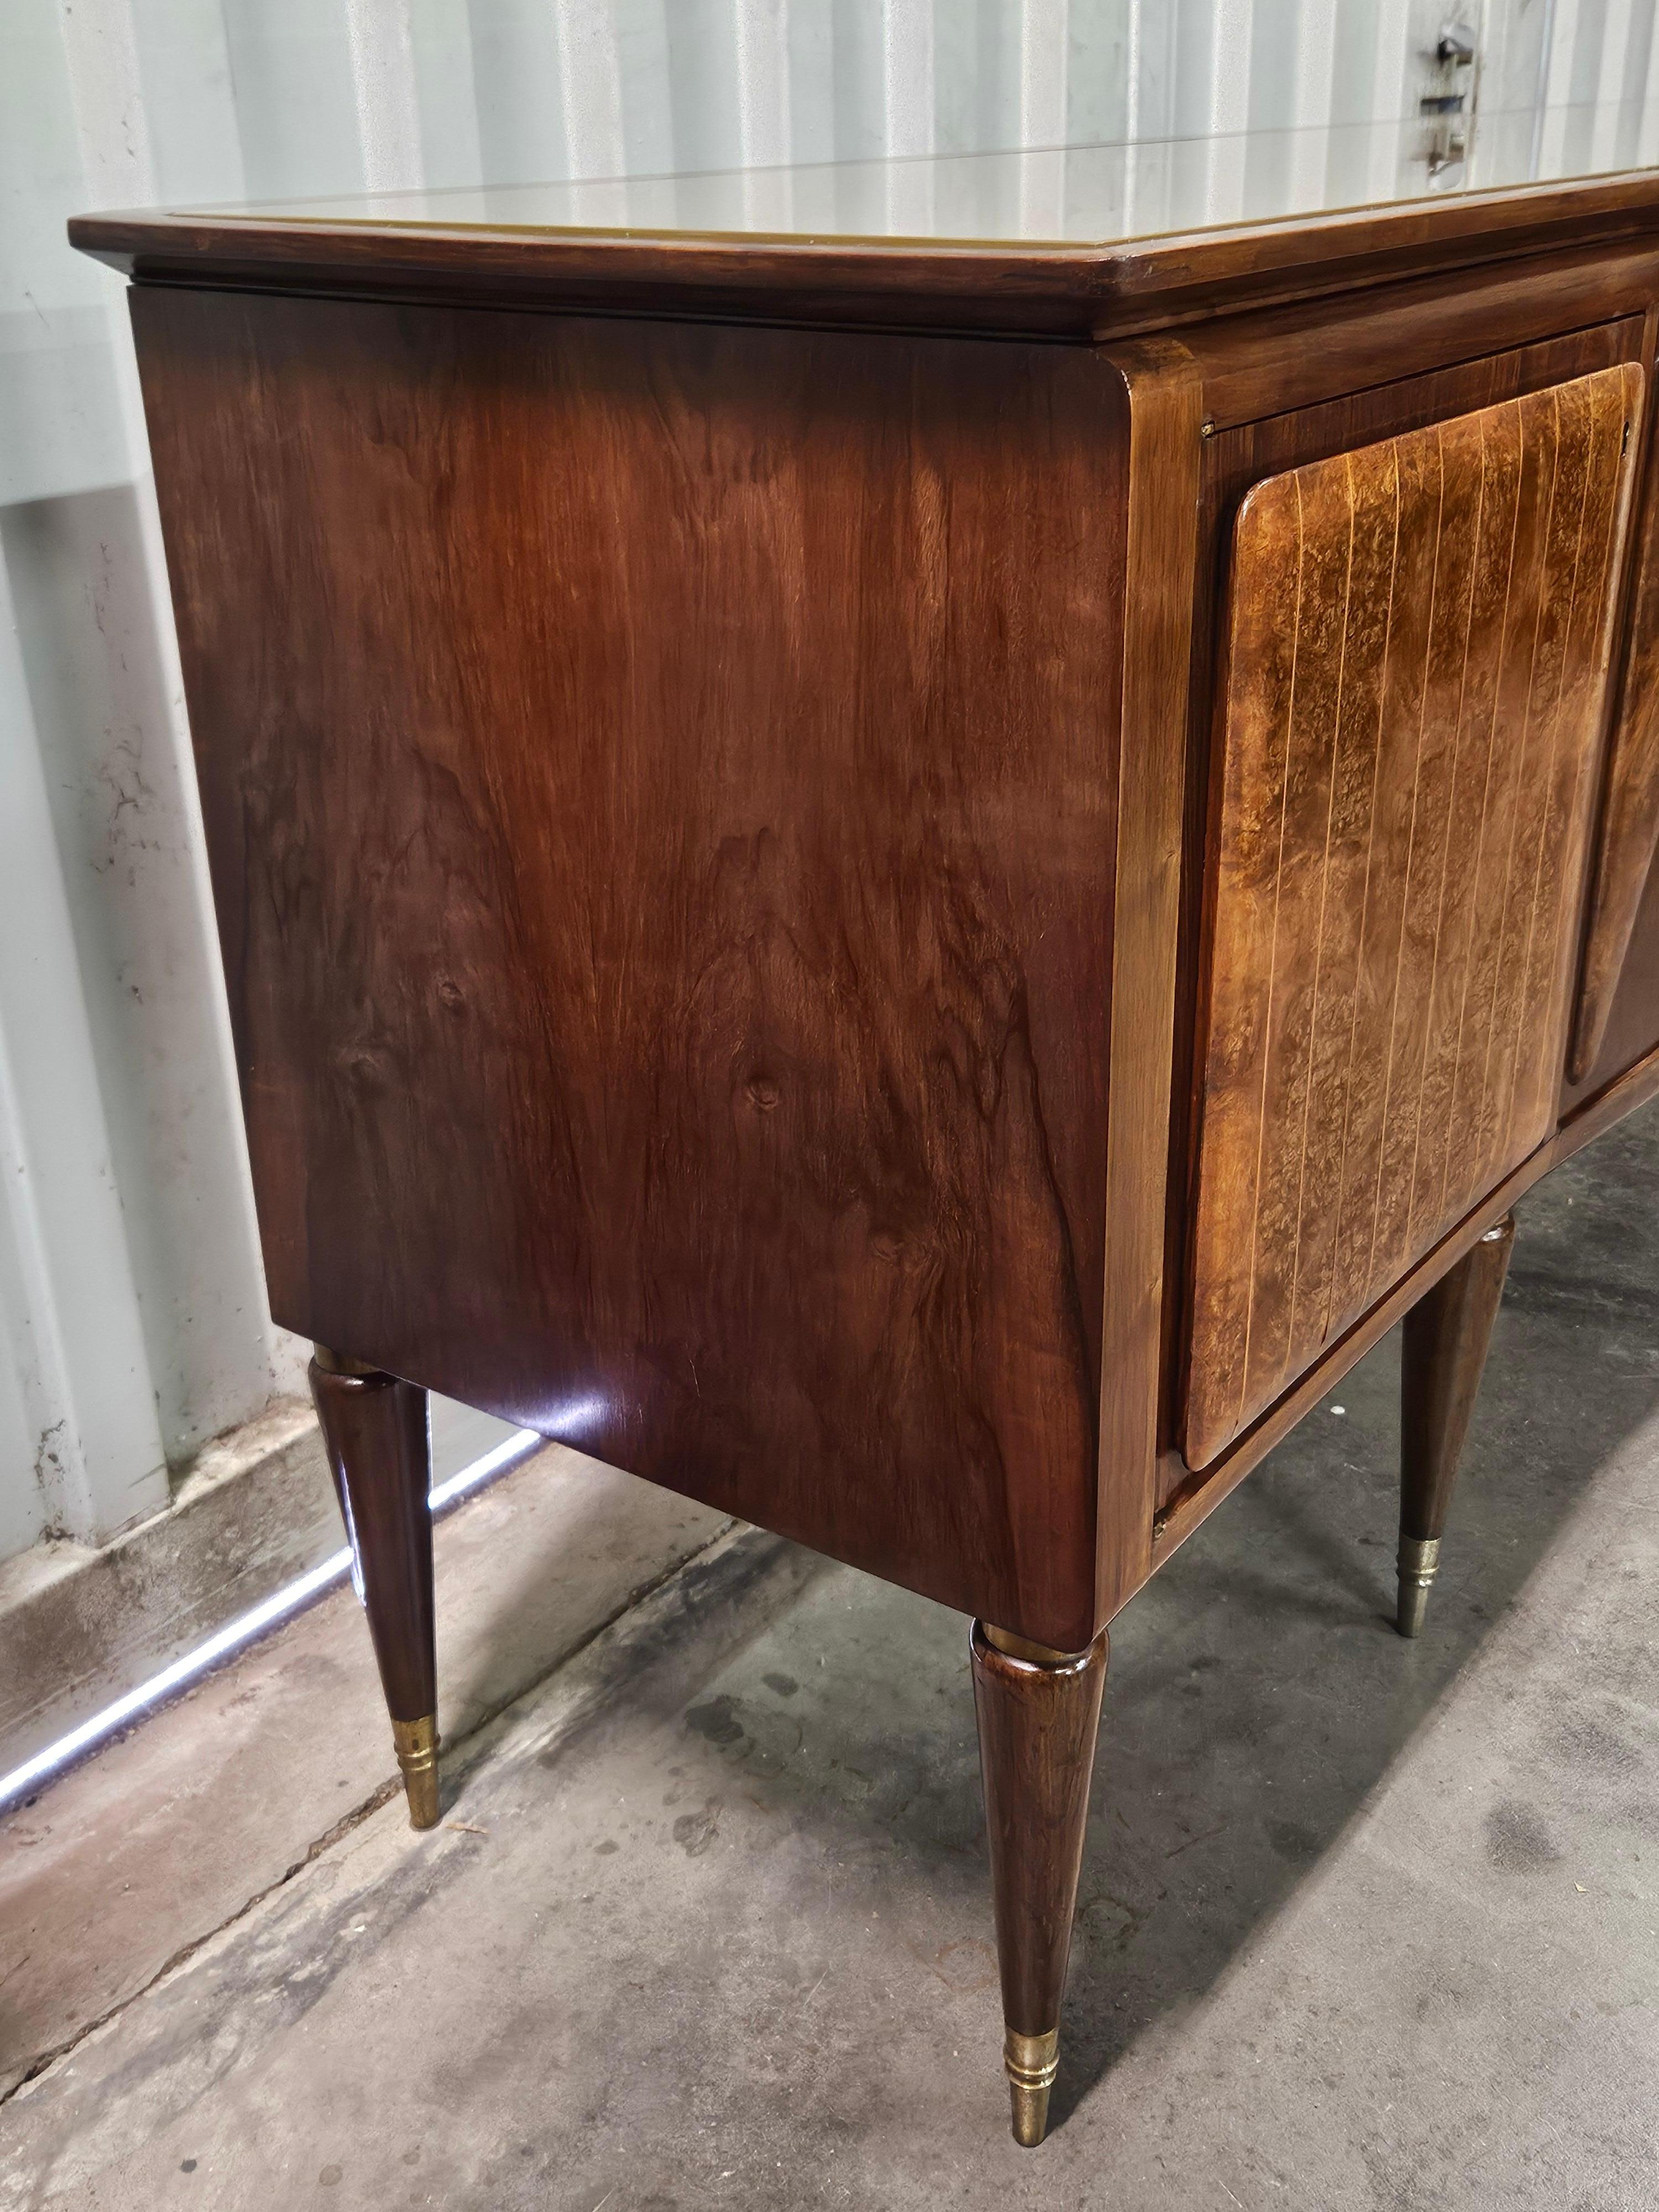 Elegant sideboard of mid-20th-century Italian origin, high quality production and workmanship in walnut with maple fillets on doors and interior drawers.

The cabinet has a curved glass top at the front, five doors where we find solid and sturdy